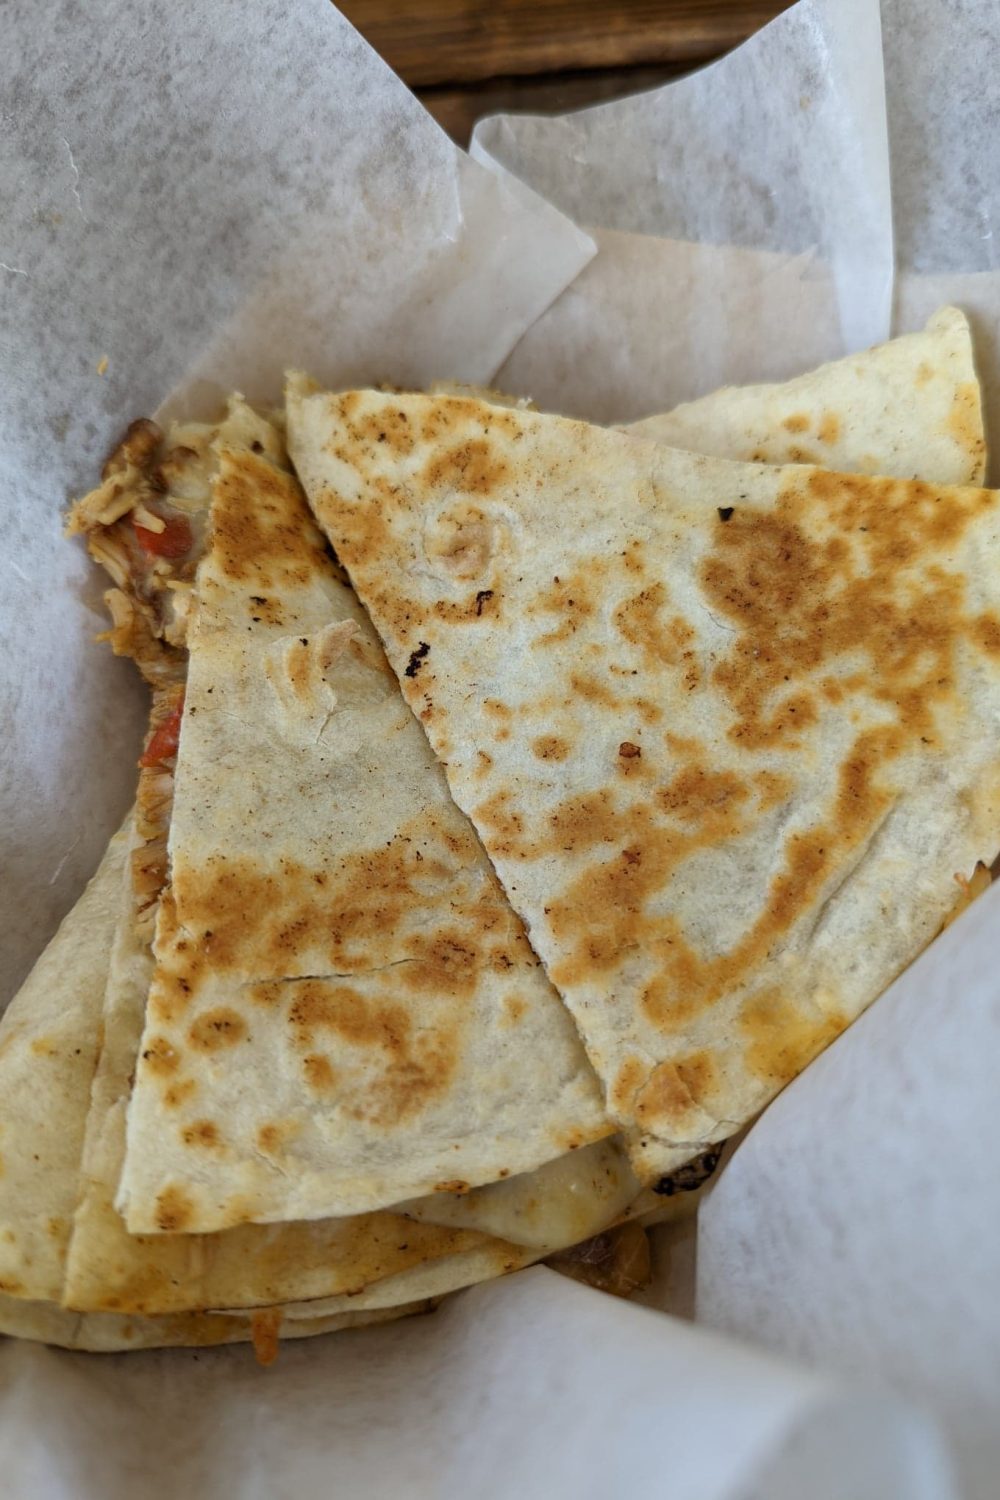 Quesadilla from Route 12 Grill